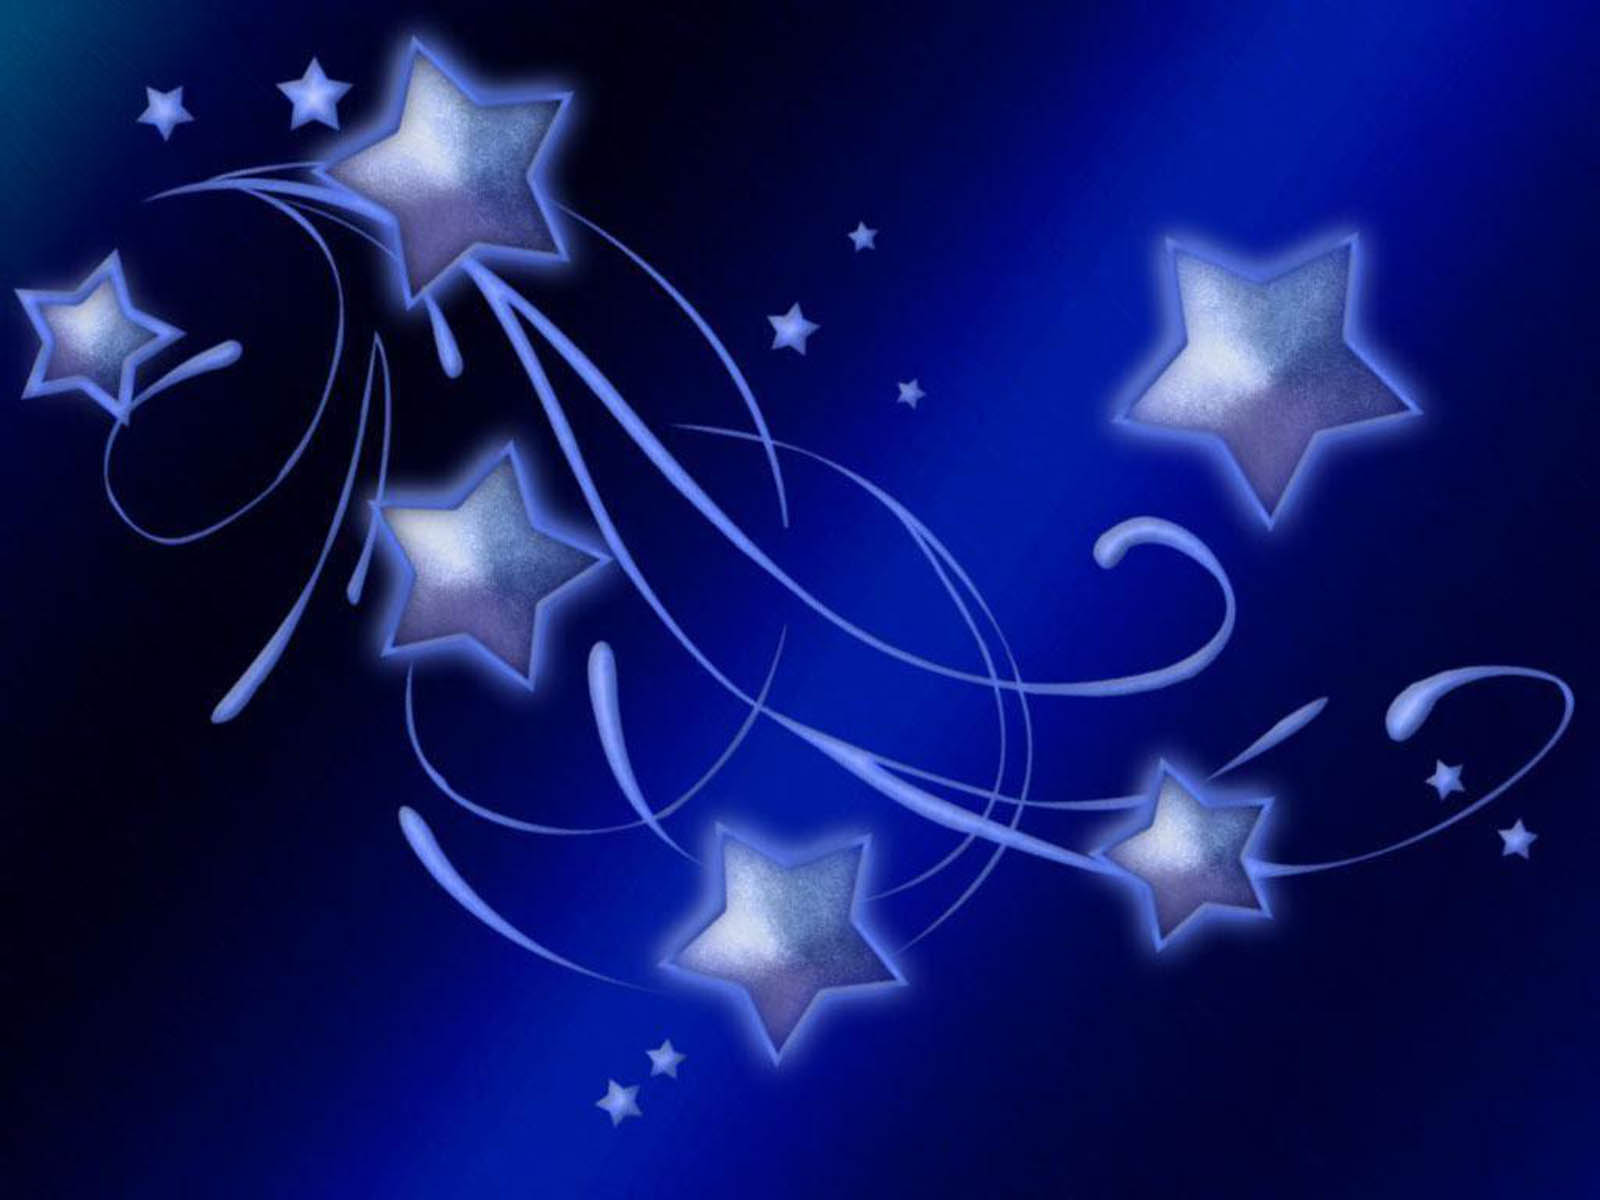  Stars Wallpapers Backgrounds Photos Pictures and Images for free